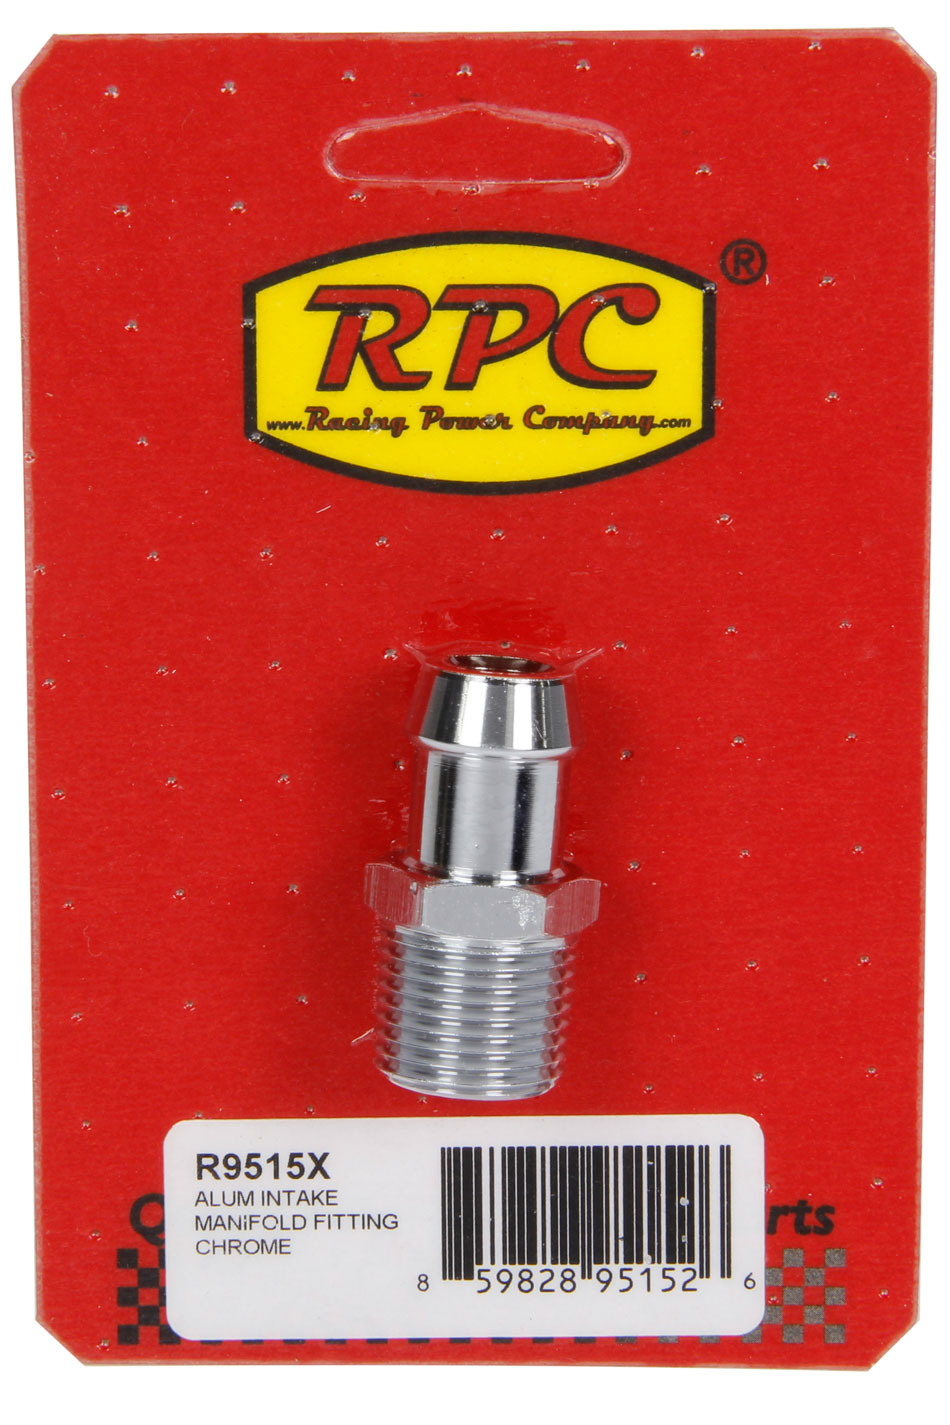 Racing Power Company R9515X Fitting, Adapter, 5/8 in Hose Barb to 1/2 in NPT, 9 In Long, Aluminum, Chrome, Each